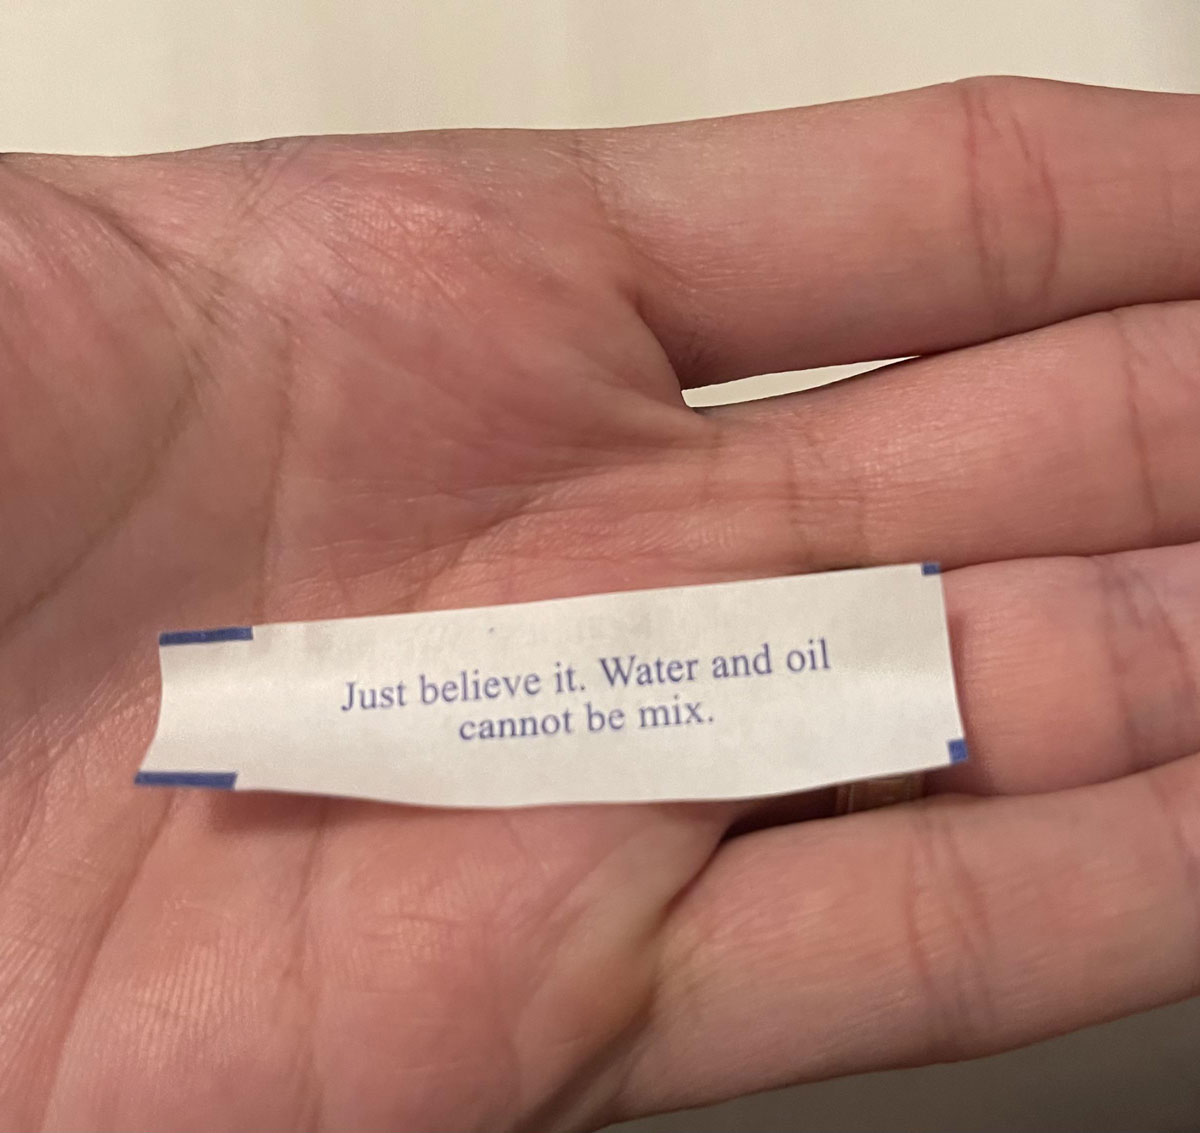 “Just believe it” fortune cookie.. I guess I will